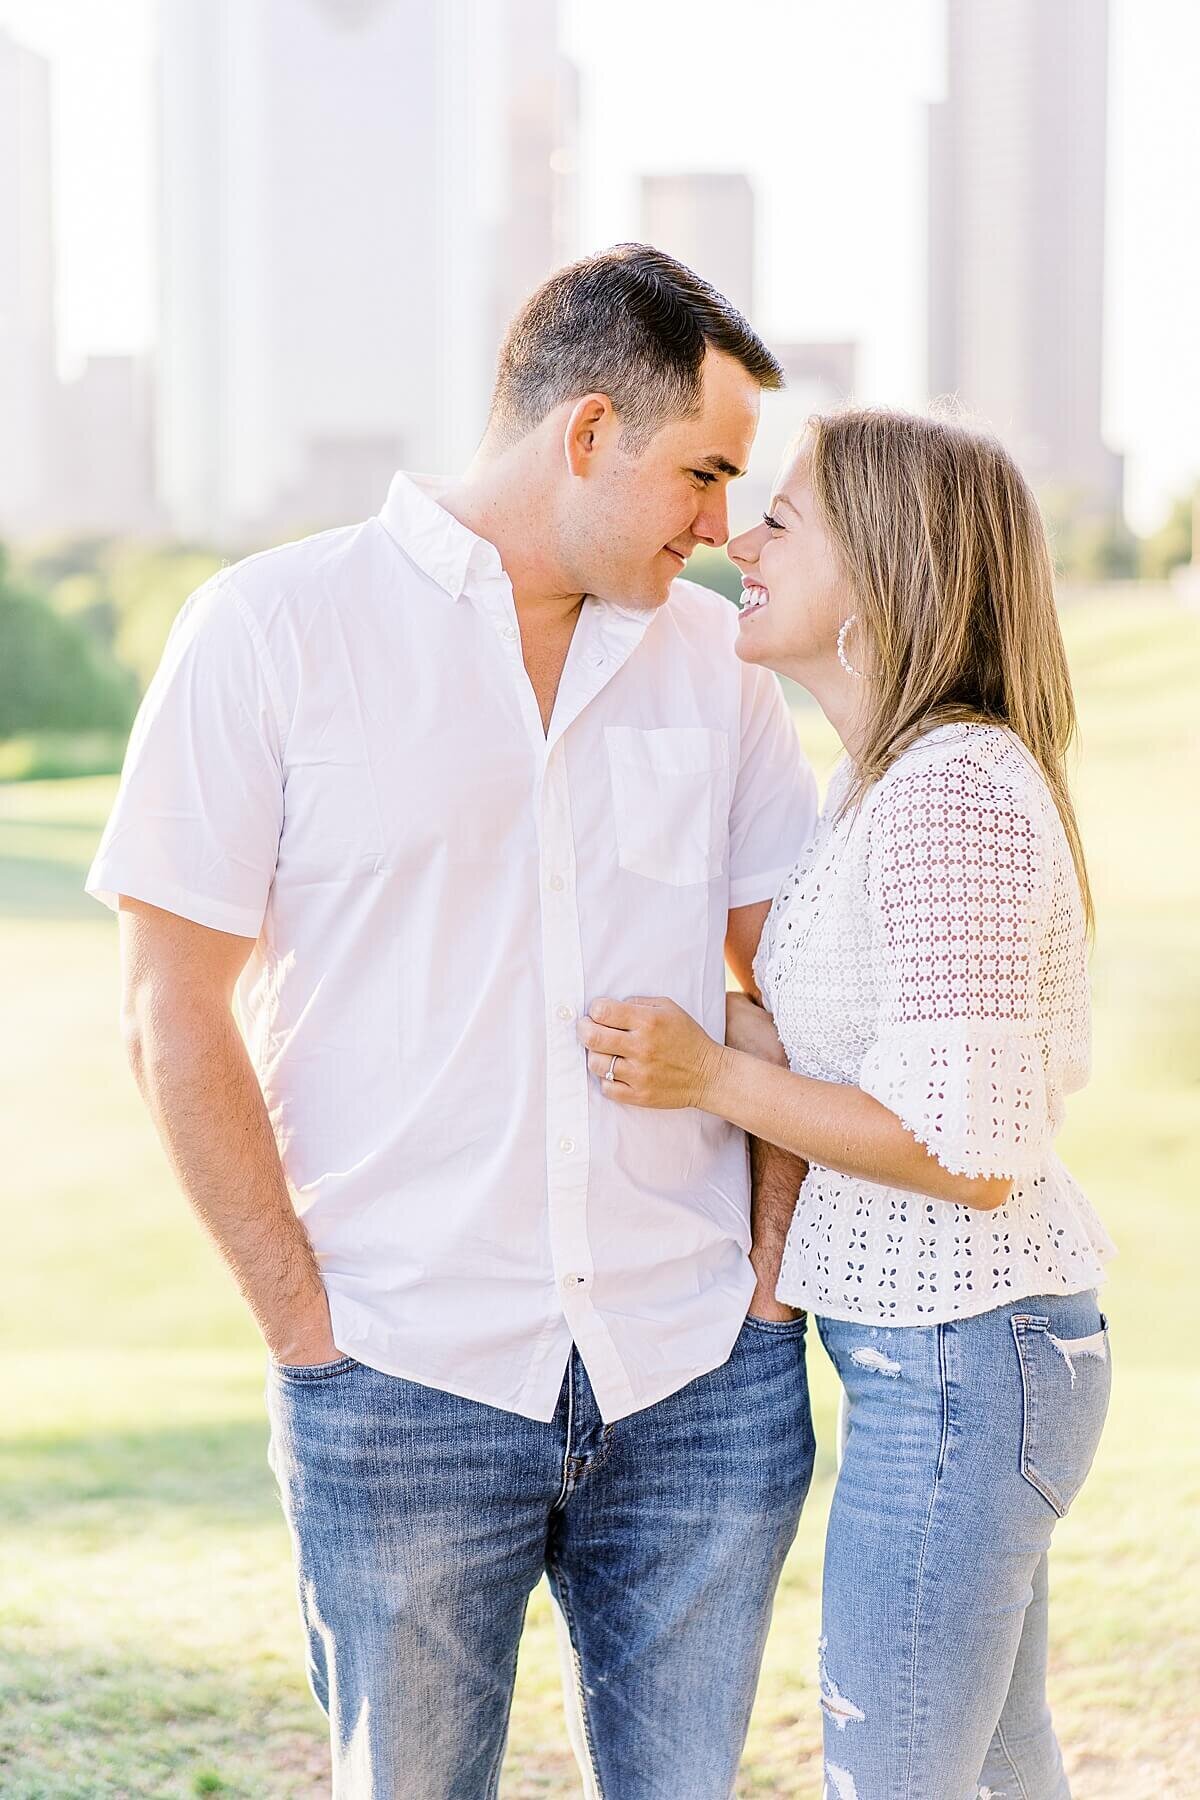 McGovern-Centennial-Gardens-Hermann-Park-Engagement-Session-Alicia-Yarrish-Photography_0001